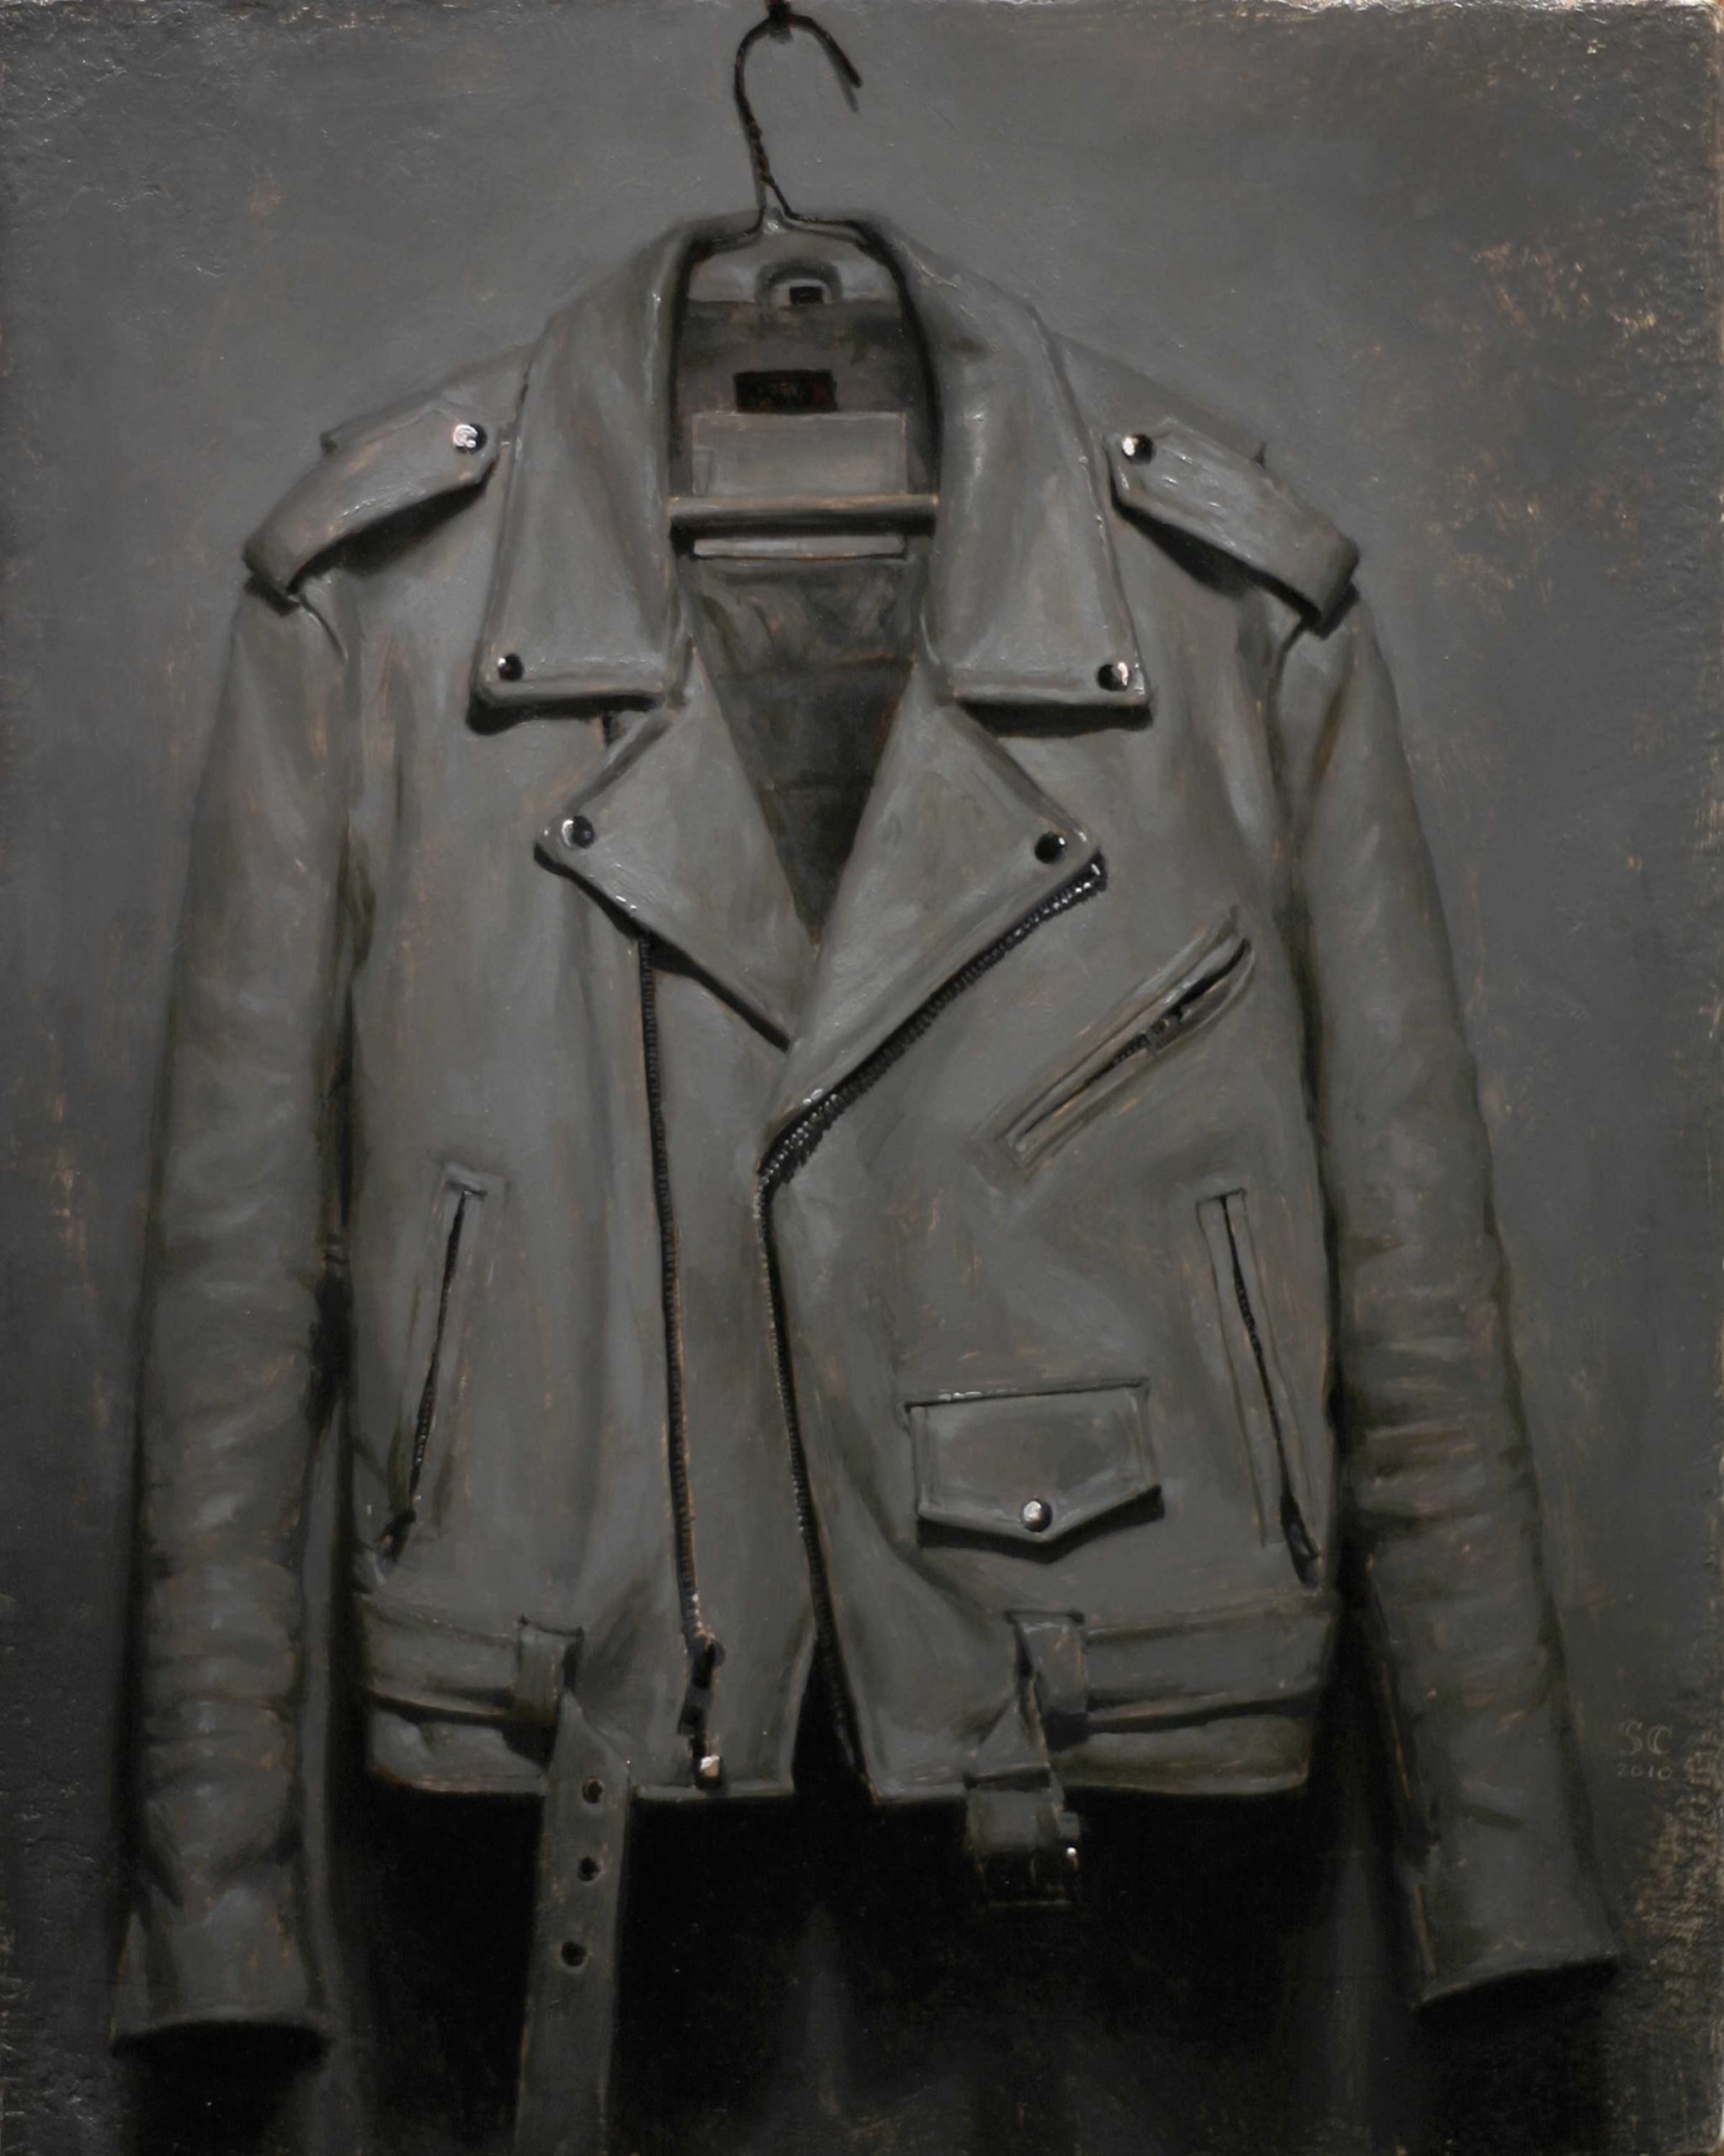 representational painting of a leather jacket